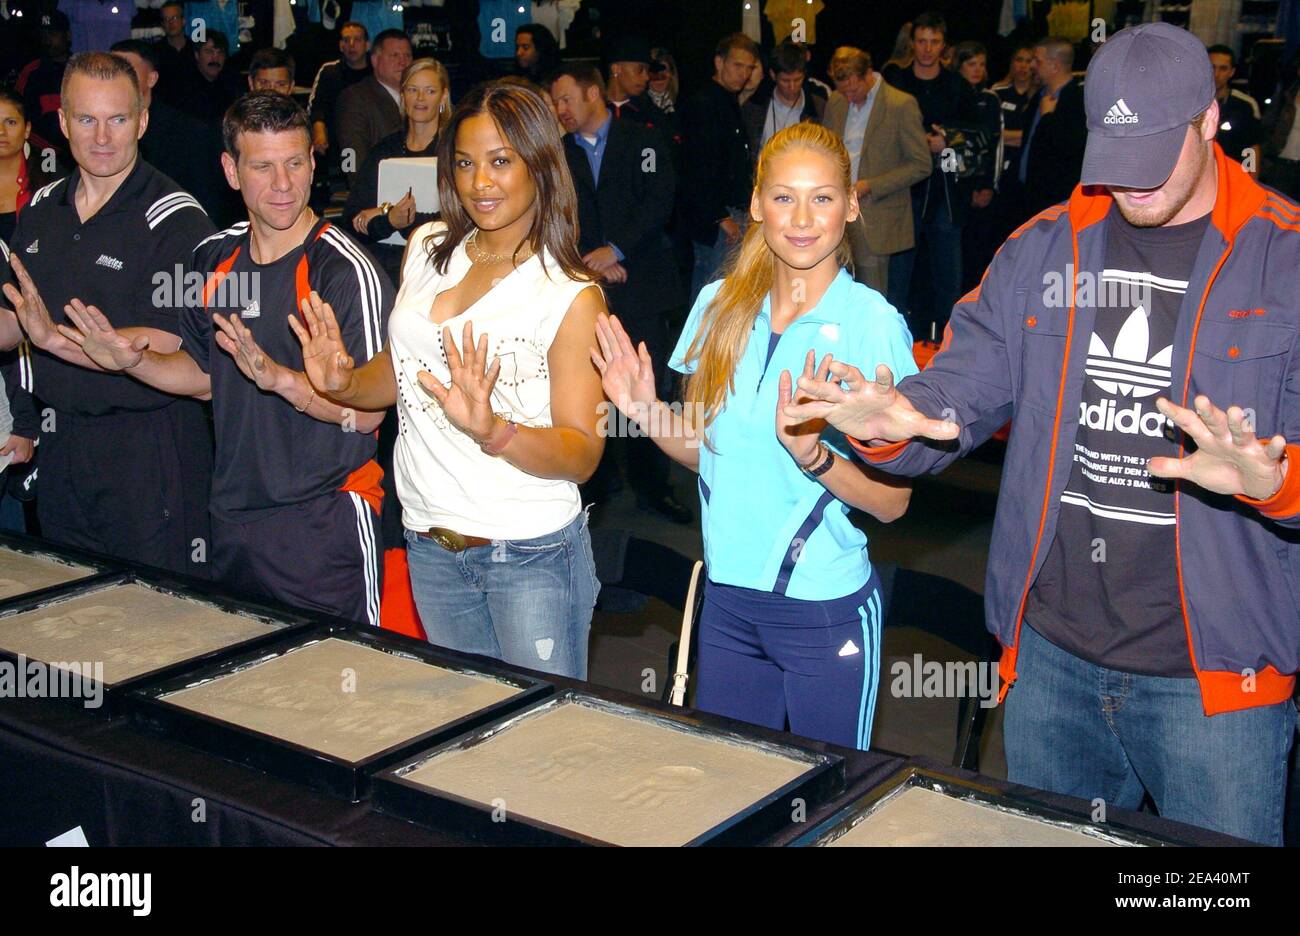 Founder/owner of Athletes' Performance Mark Verstegen, soccer player Jeff Agoos, boxer Laila Ali, tennis player Anna Kournikova and NY Giants' Jeremy Shockey cast their handprints in cement during the Opening of the largest 'Adidas Sport Performance Store' in the World, at Downtown Manhattan in New York, USA, on May 7, 2005. Photo by Slaven Vlasic/CAMELEON/ABACA. Stock Photo